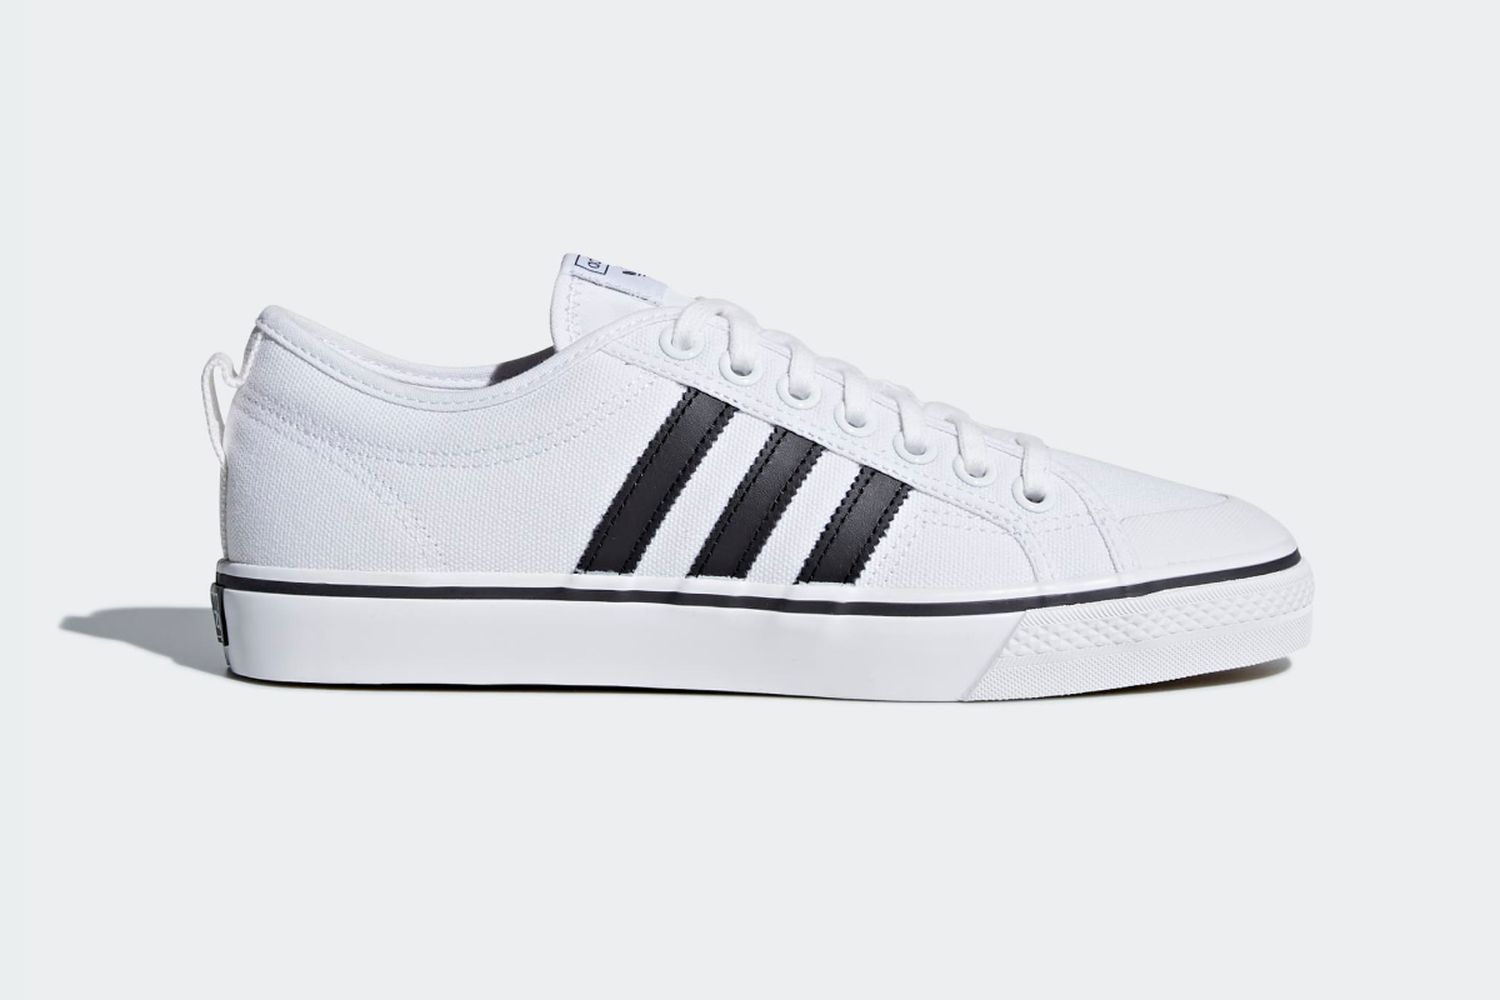 Shop the Best Lifestyle Sneakers at Less Than Eighty Dollars